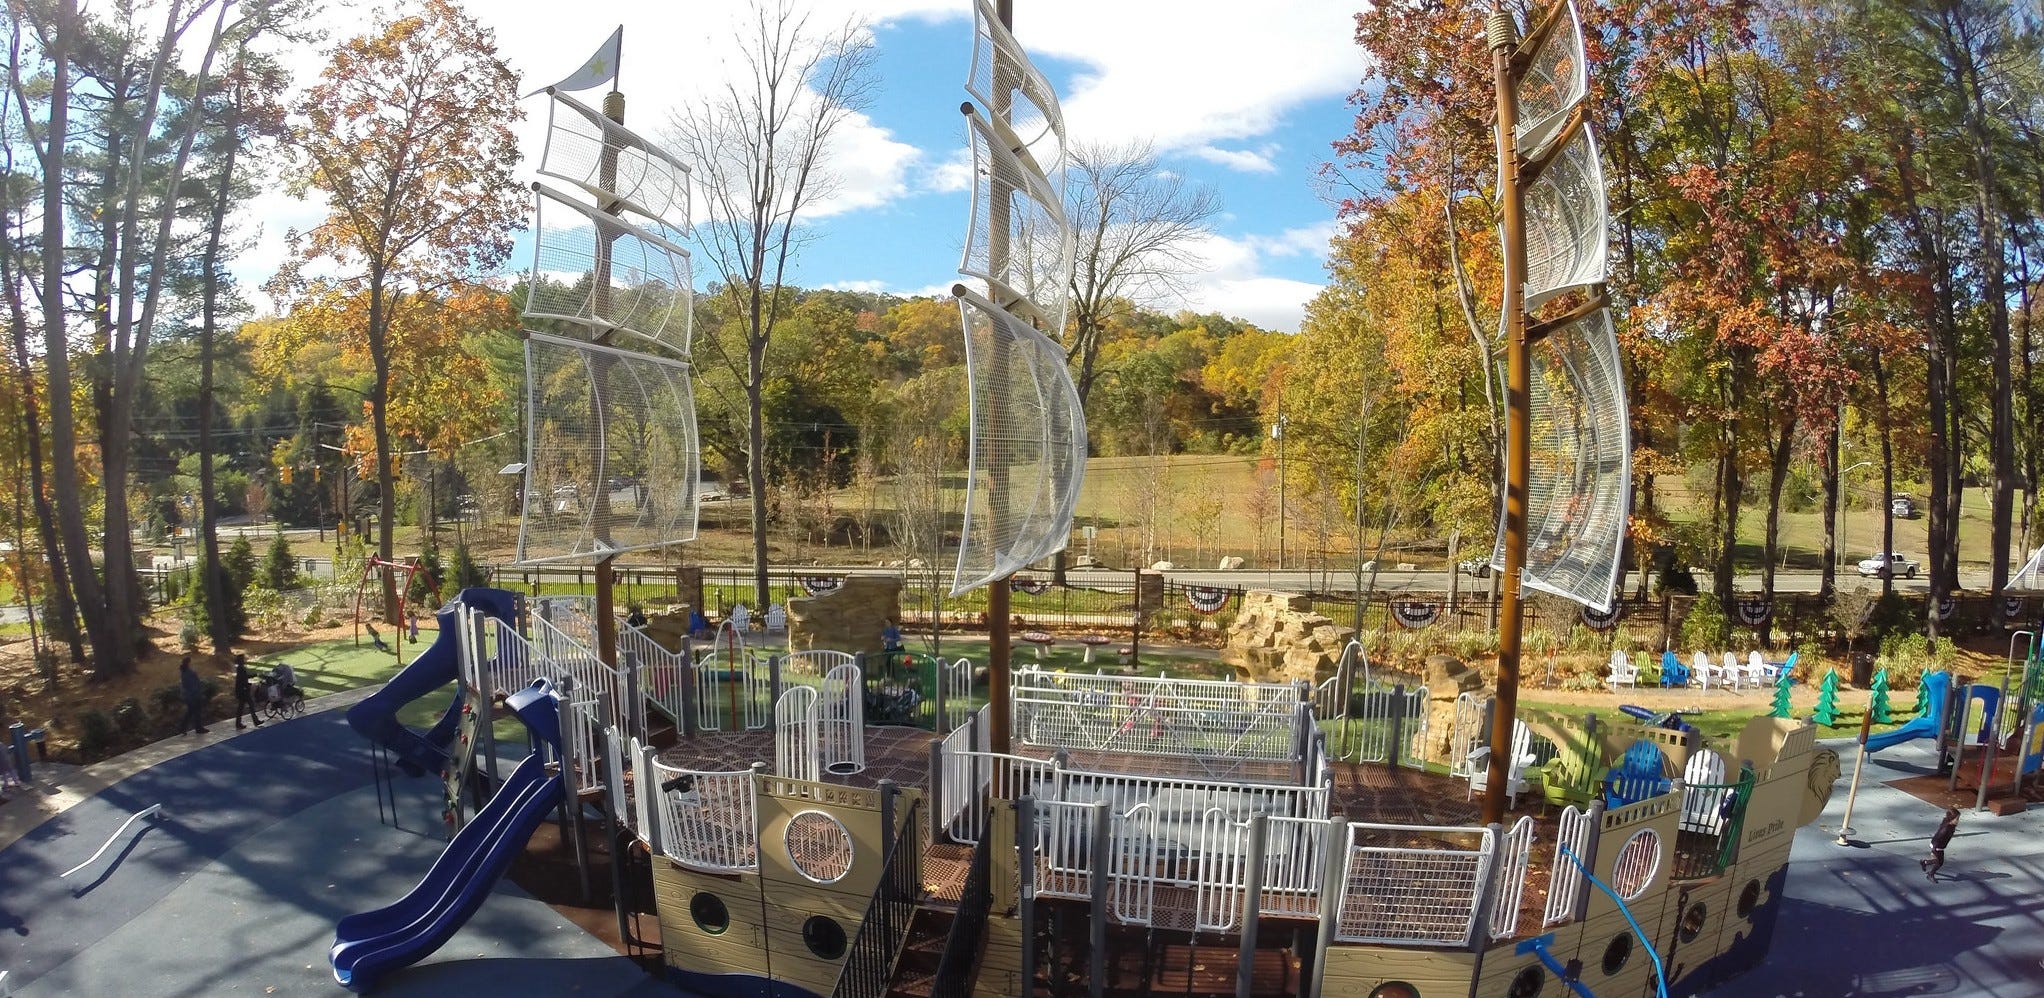 GameTime Playground Part of Award-Winning Recreation Project in New Jersey